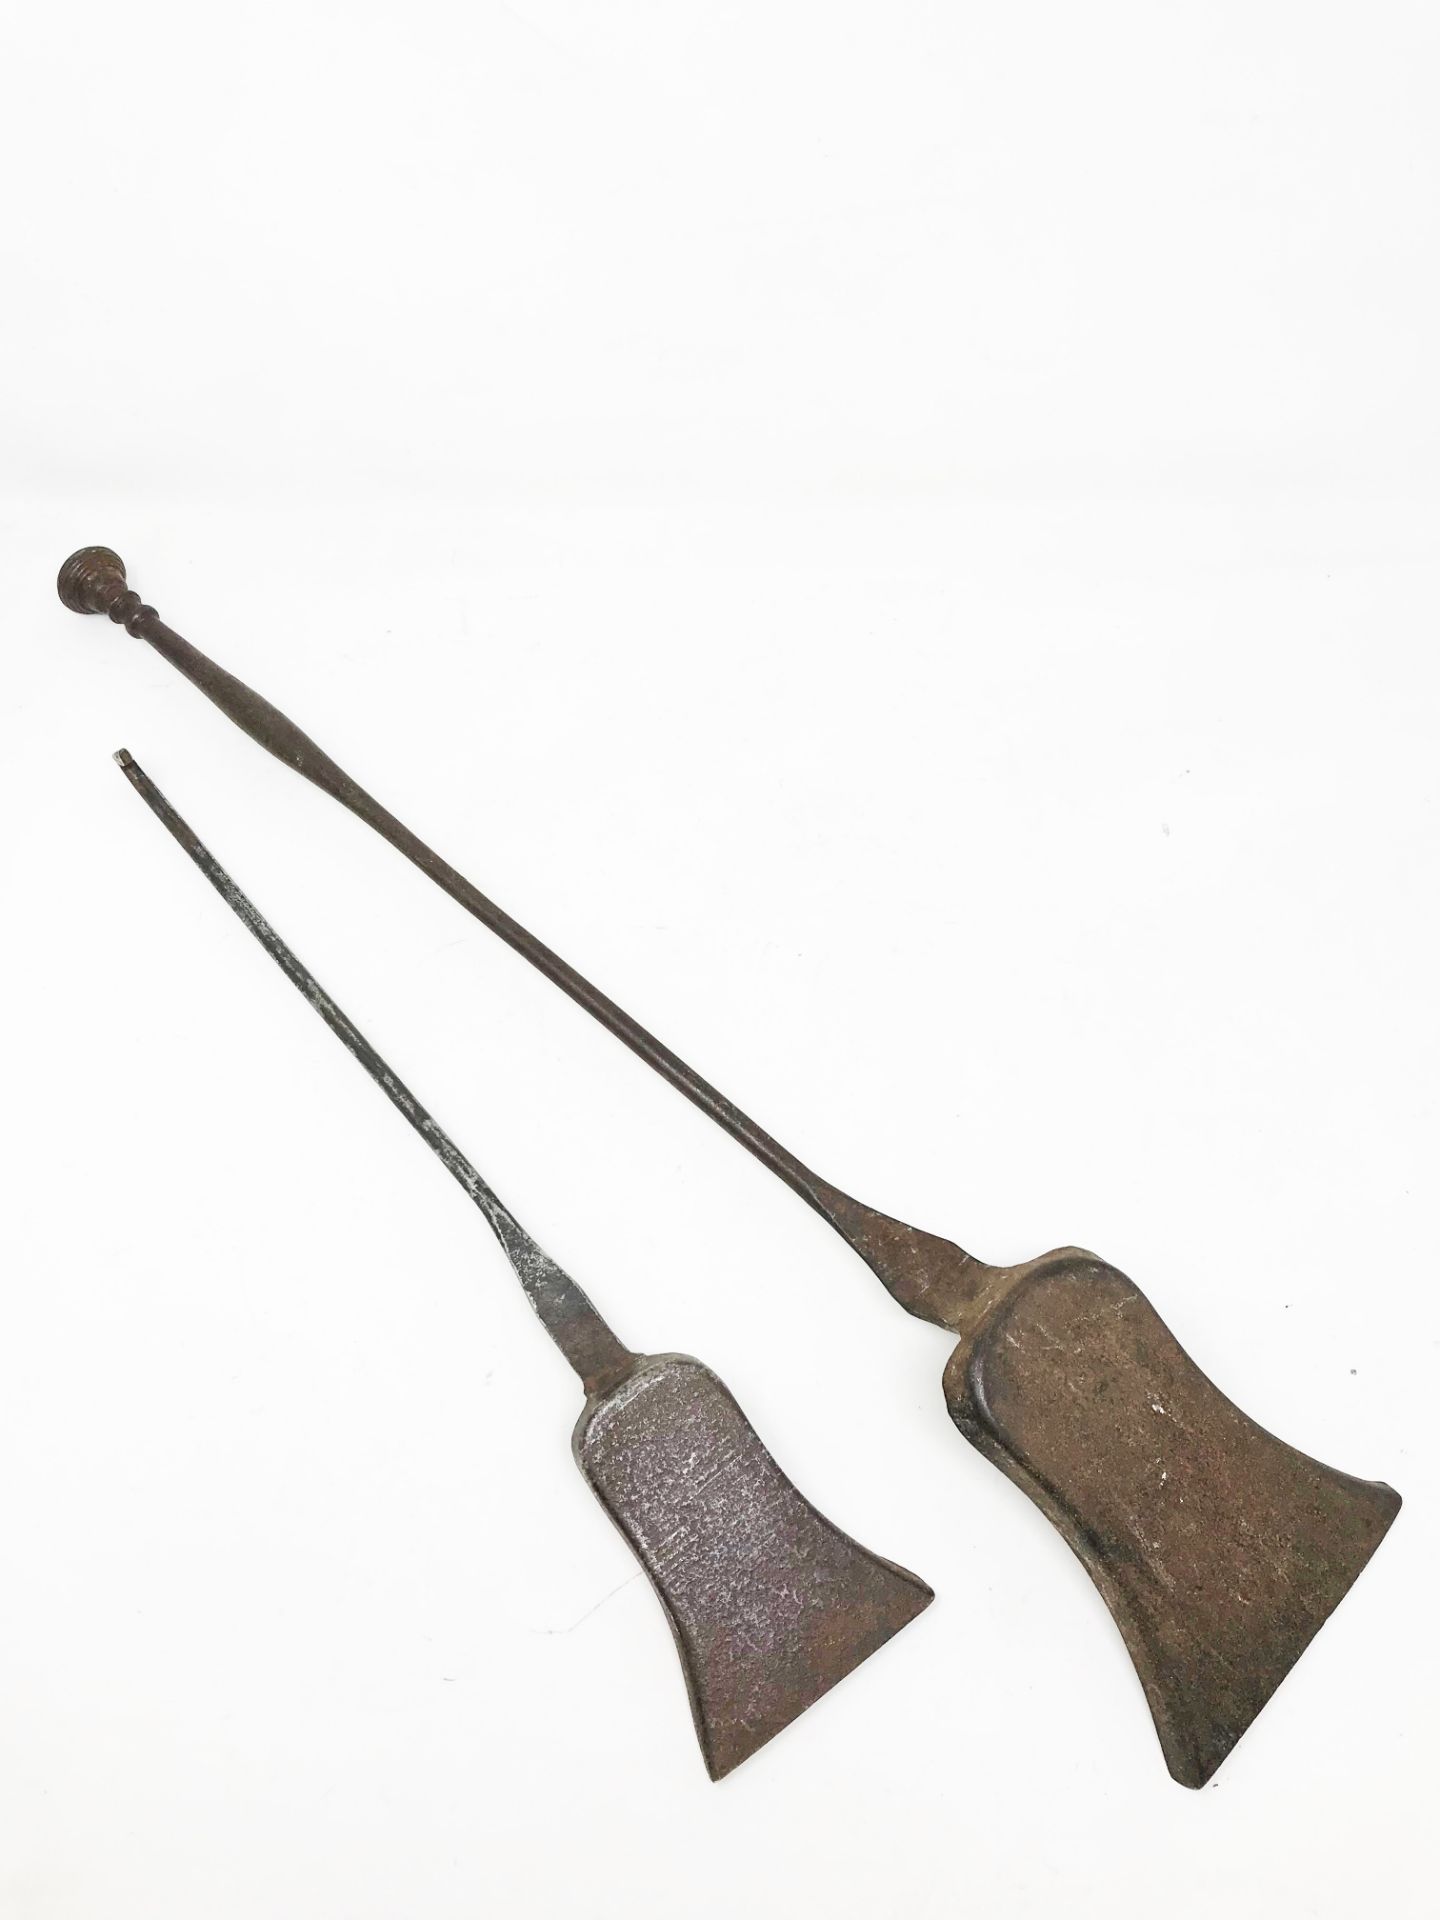 Two ember shovels58 and 41 cm